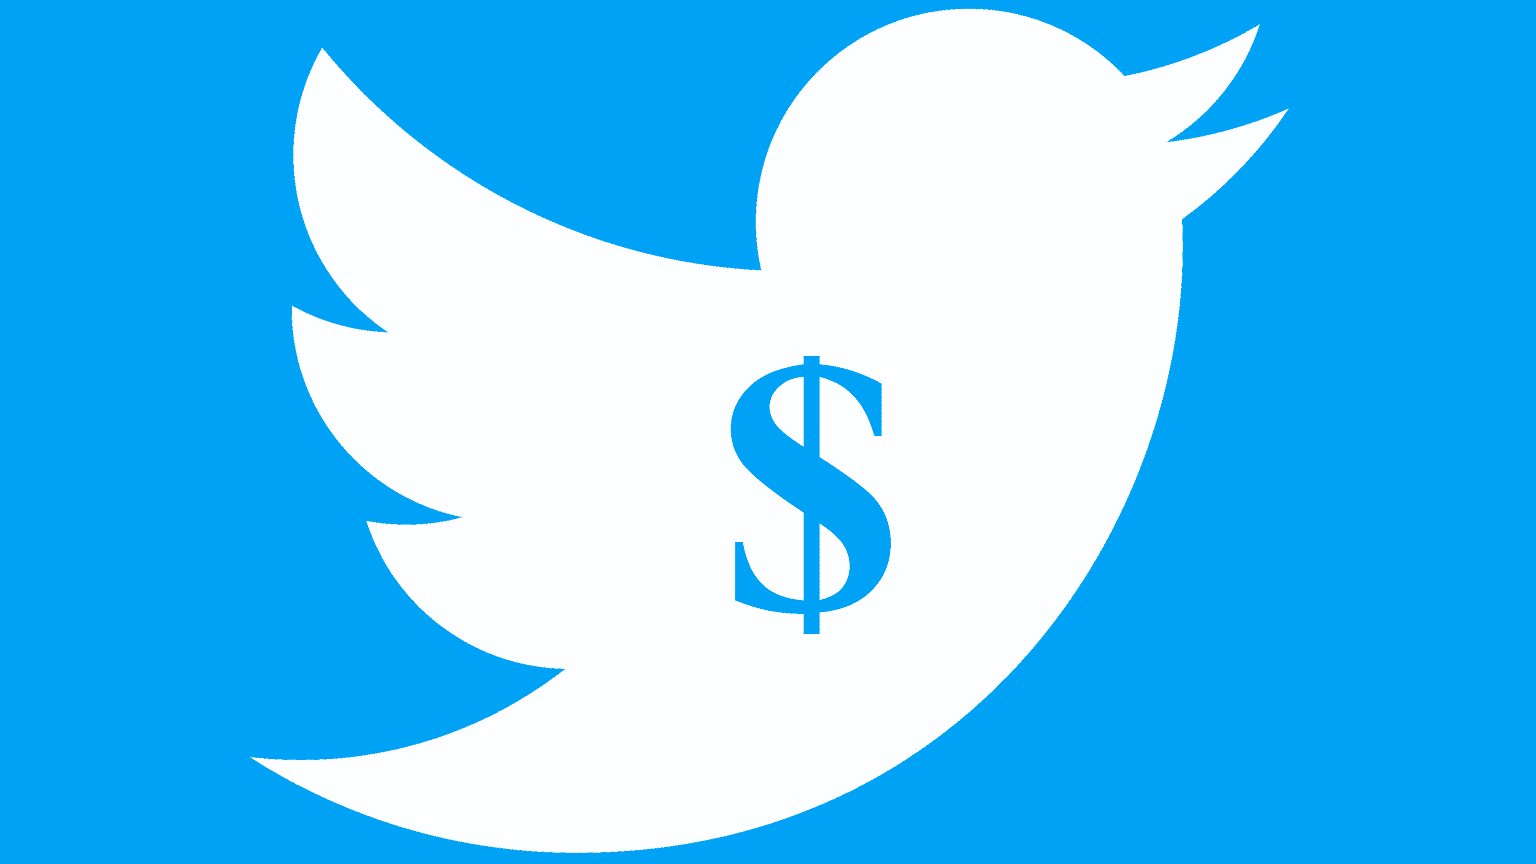 Twitter Announces Paid Super Followers Feature So You Can Charge For Tweets